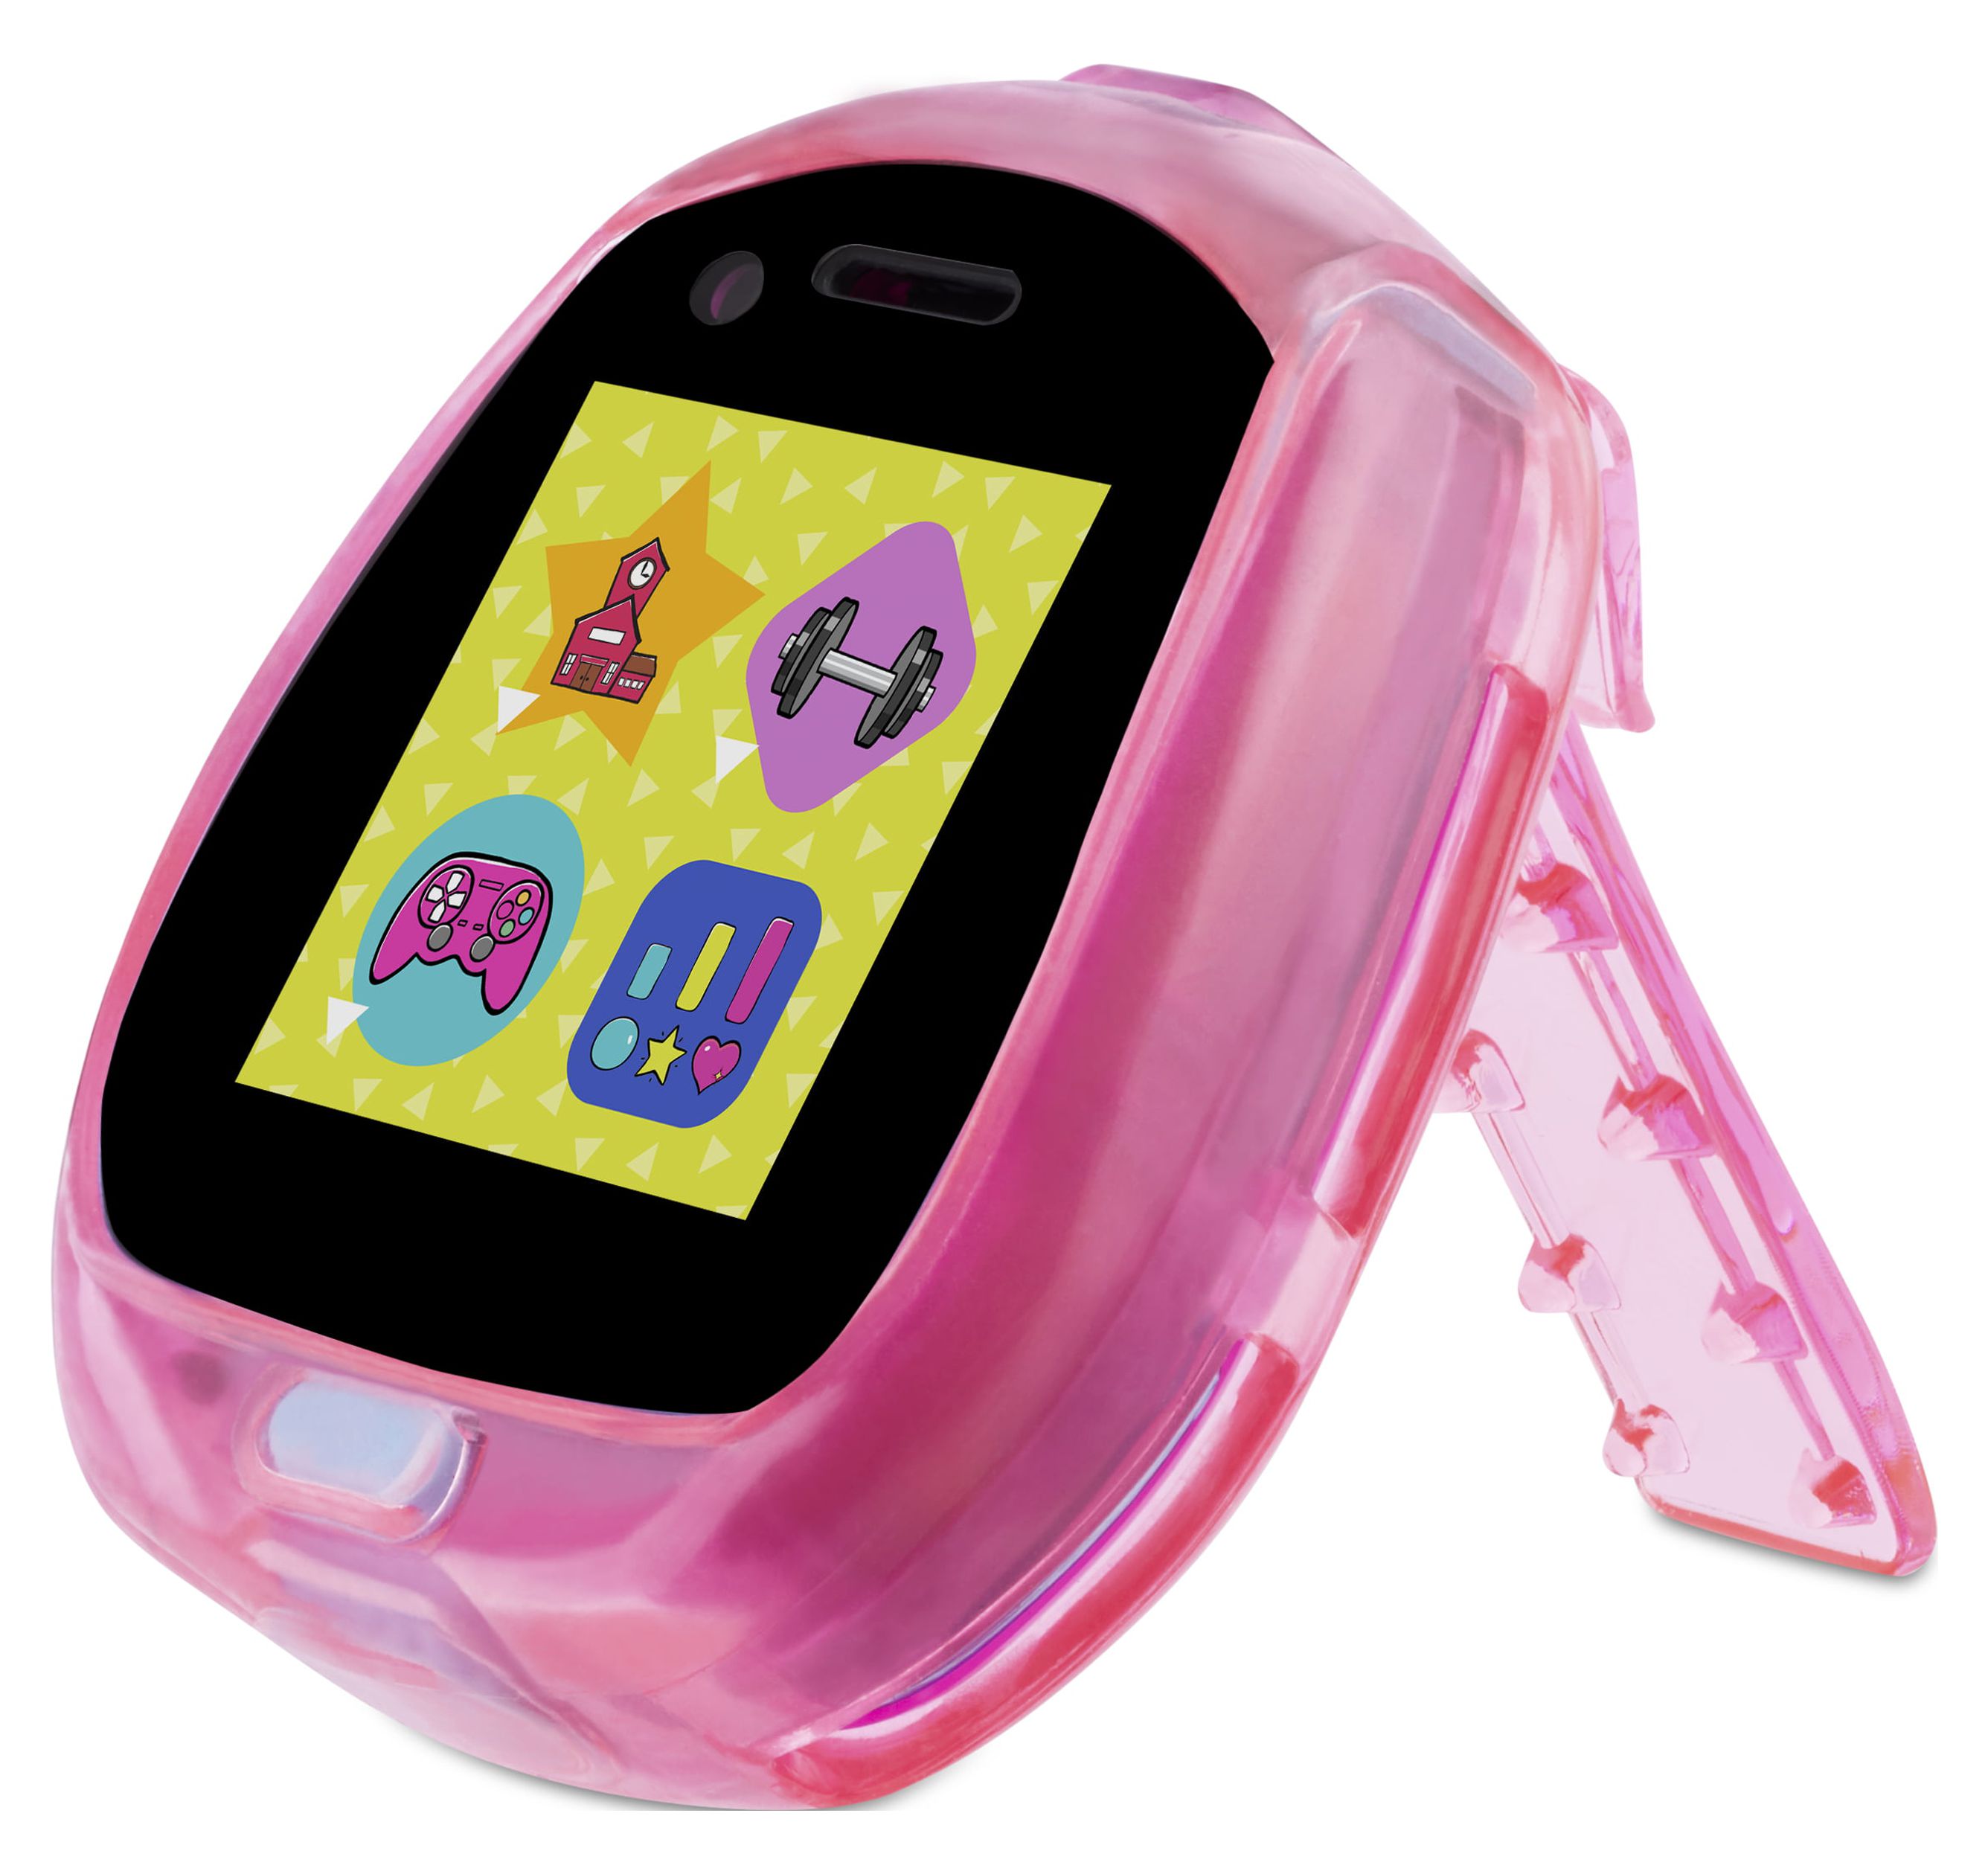 LOL Surprise Smartwatch & Camera 2.0 With Head-to-Head Gaming, Advanced Graphics - image 4 of 4